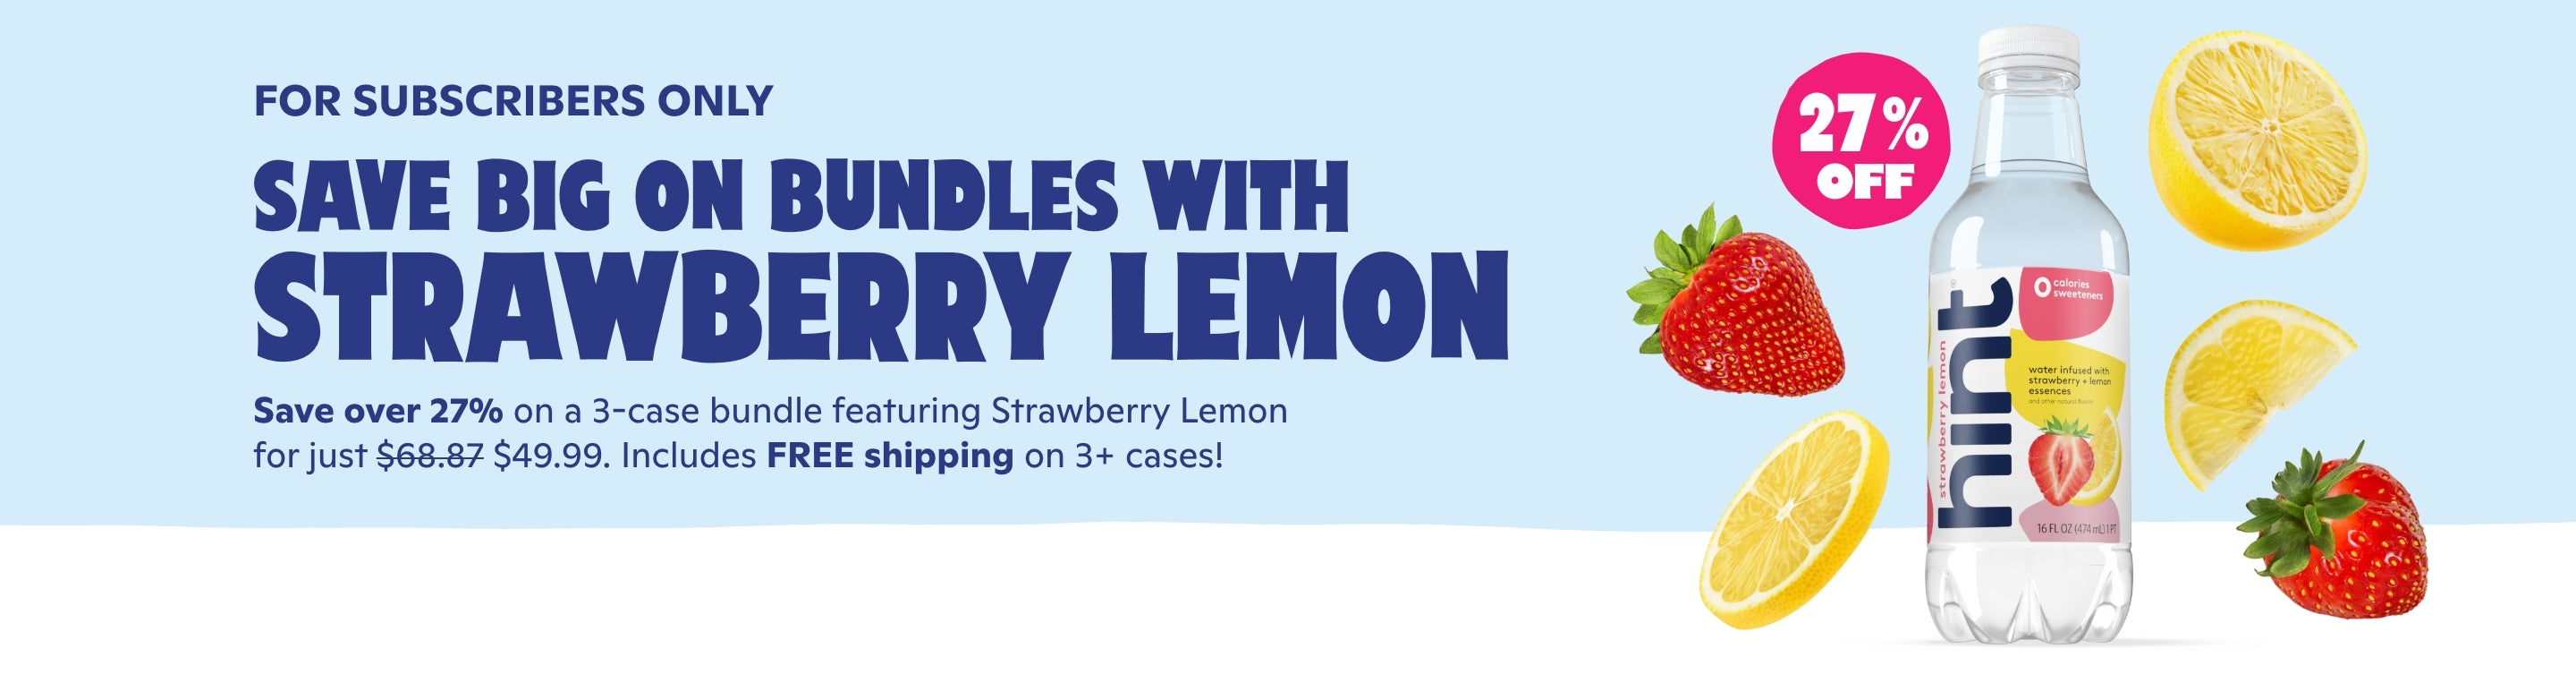 <h1>For subscribers only</h1> <br> Save big on bundles with strawberry lemon <br> Save over 27% on a 3-case bundle featuring strawberry lemon <br> for just $49.99 + FREE shipping on 3+ cases